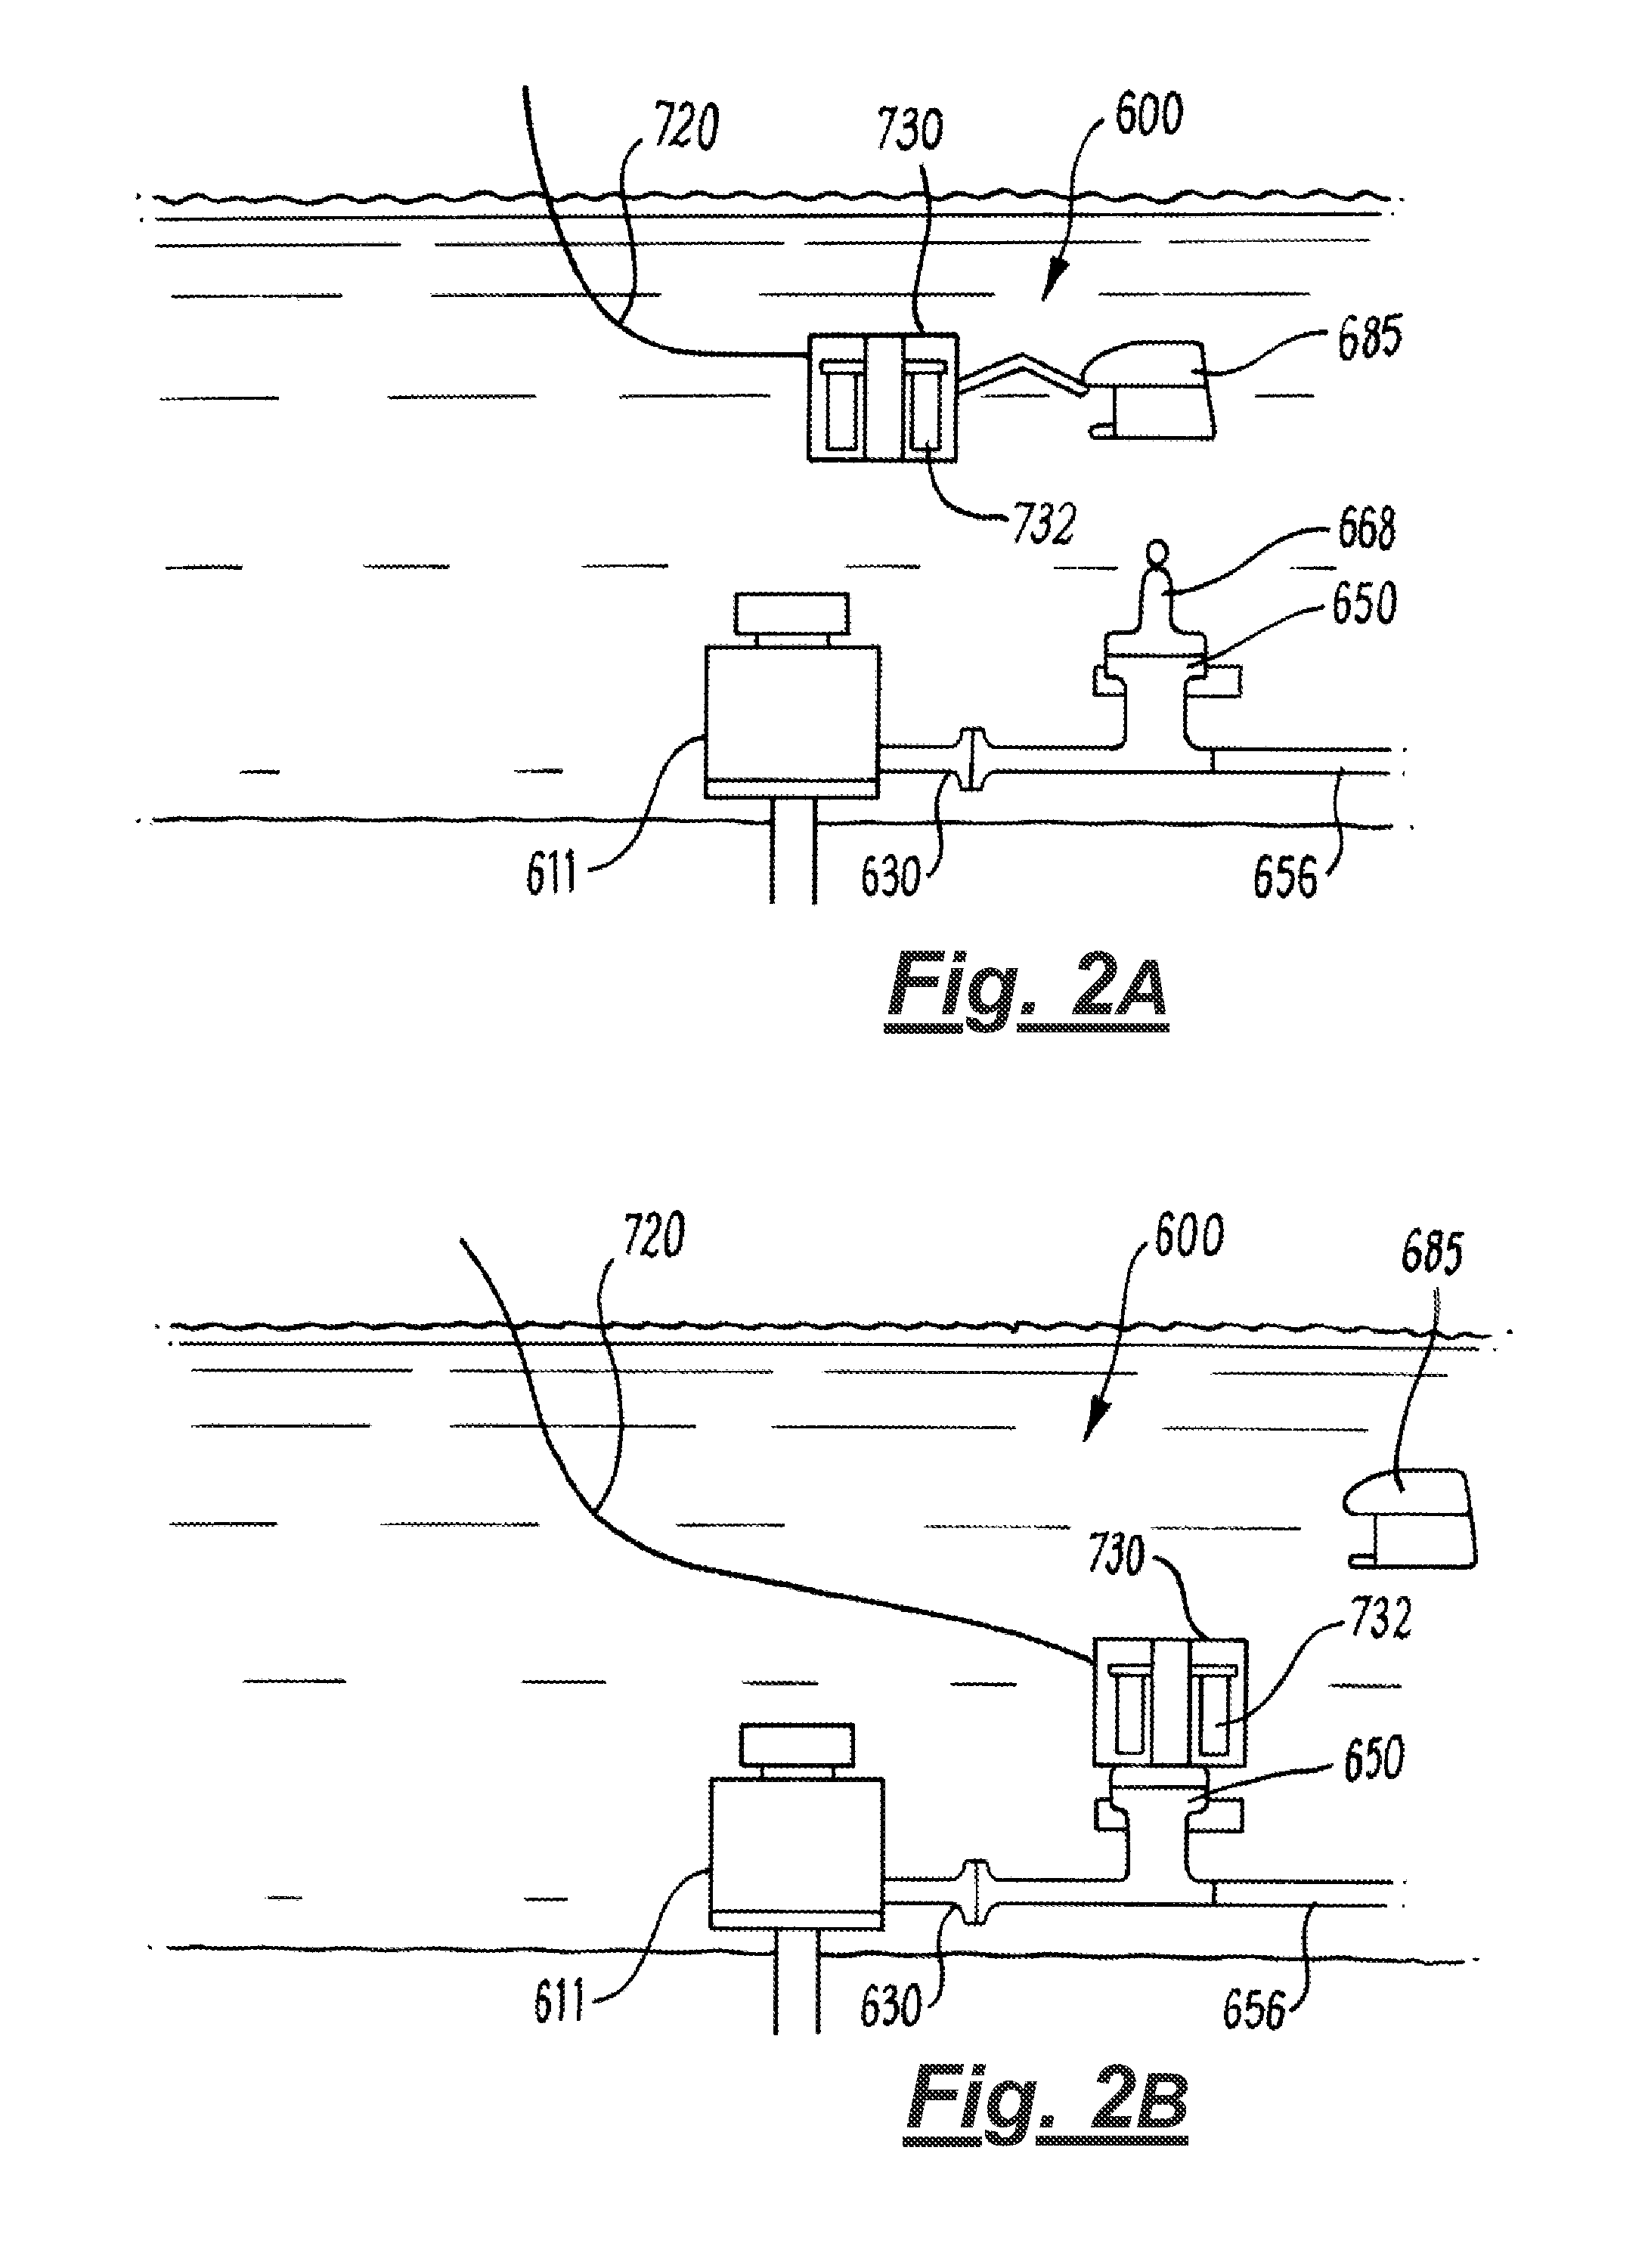 Oilfield apparatus and methods of use